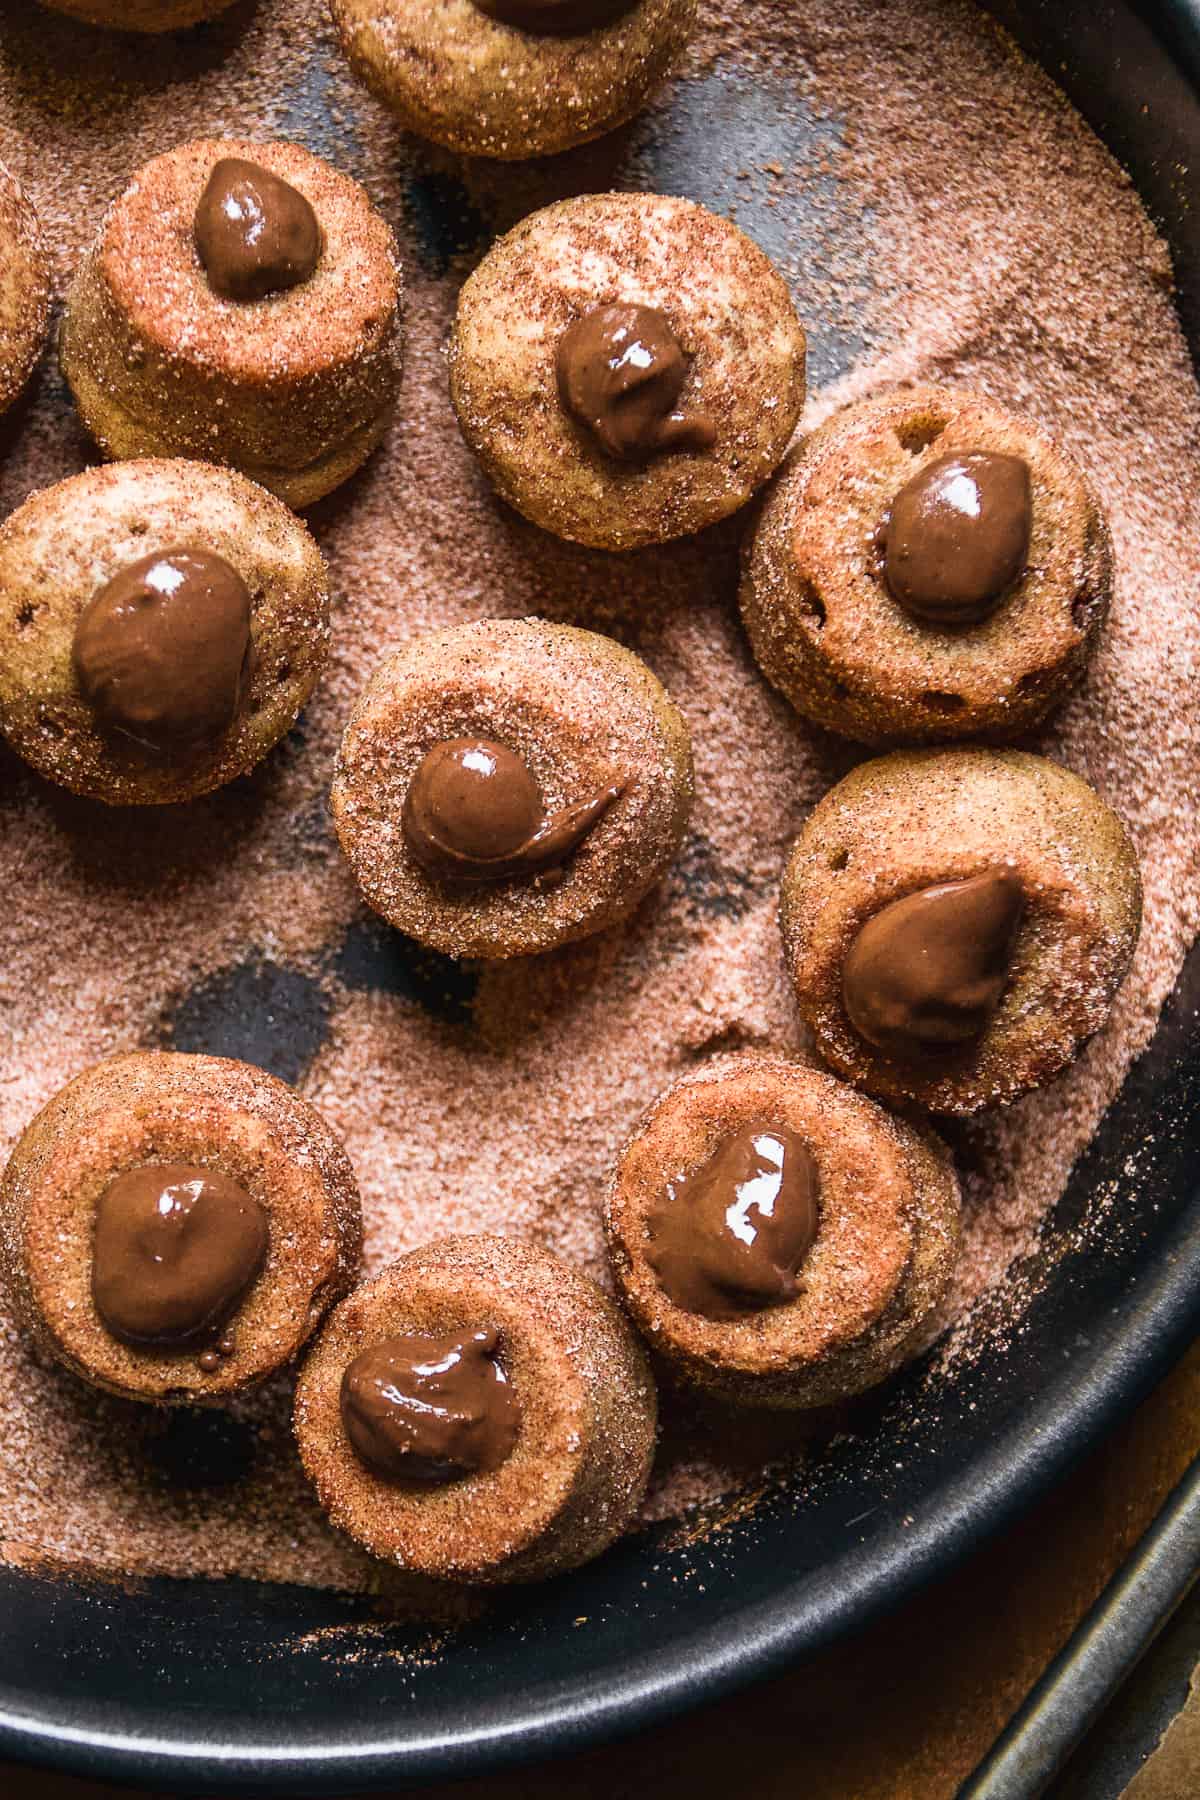 Churro donut holes with chocolate SunButter in the middle.